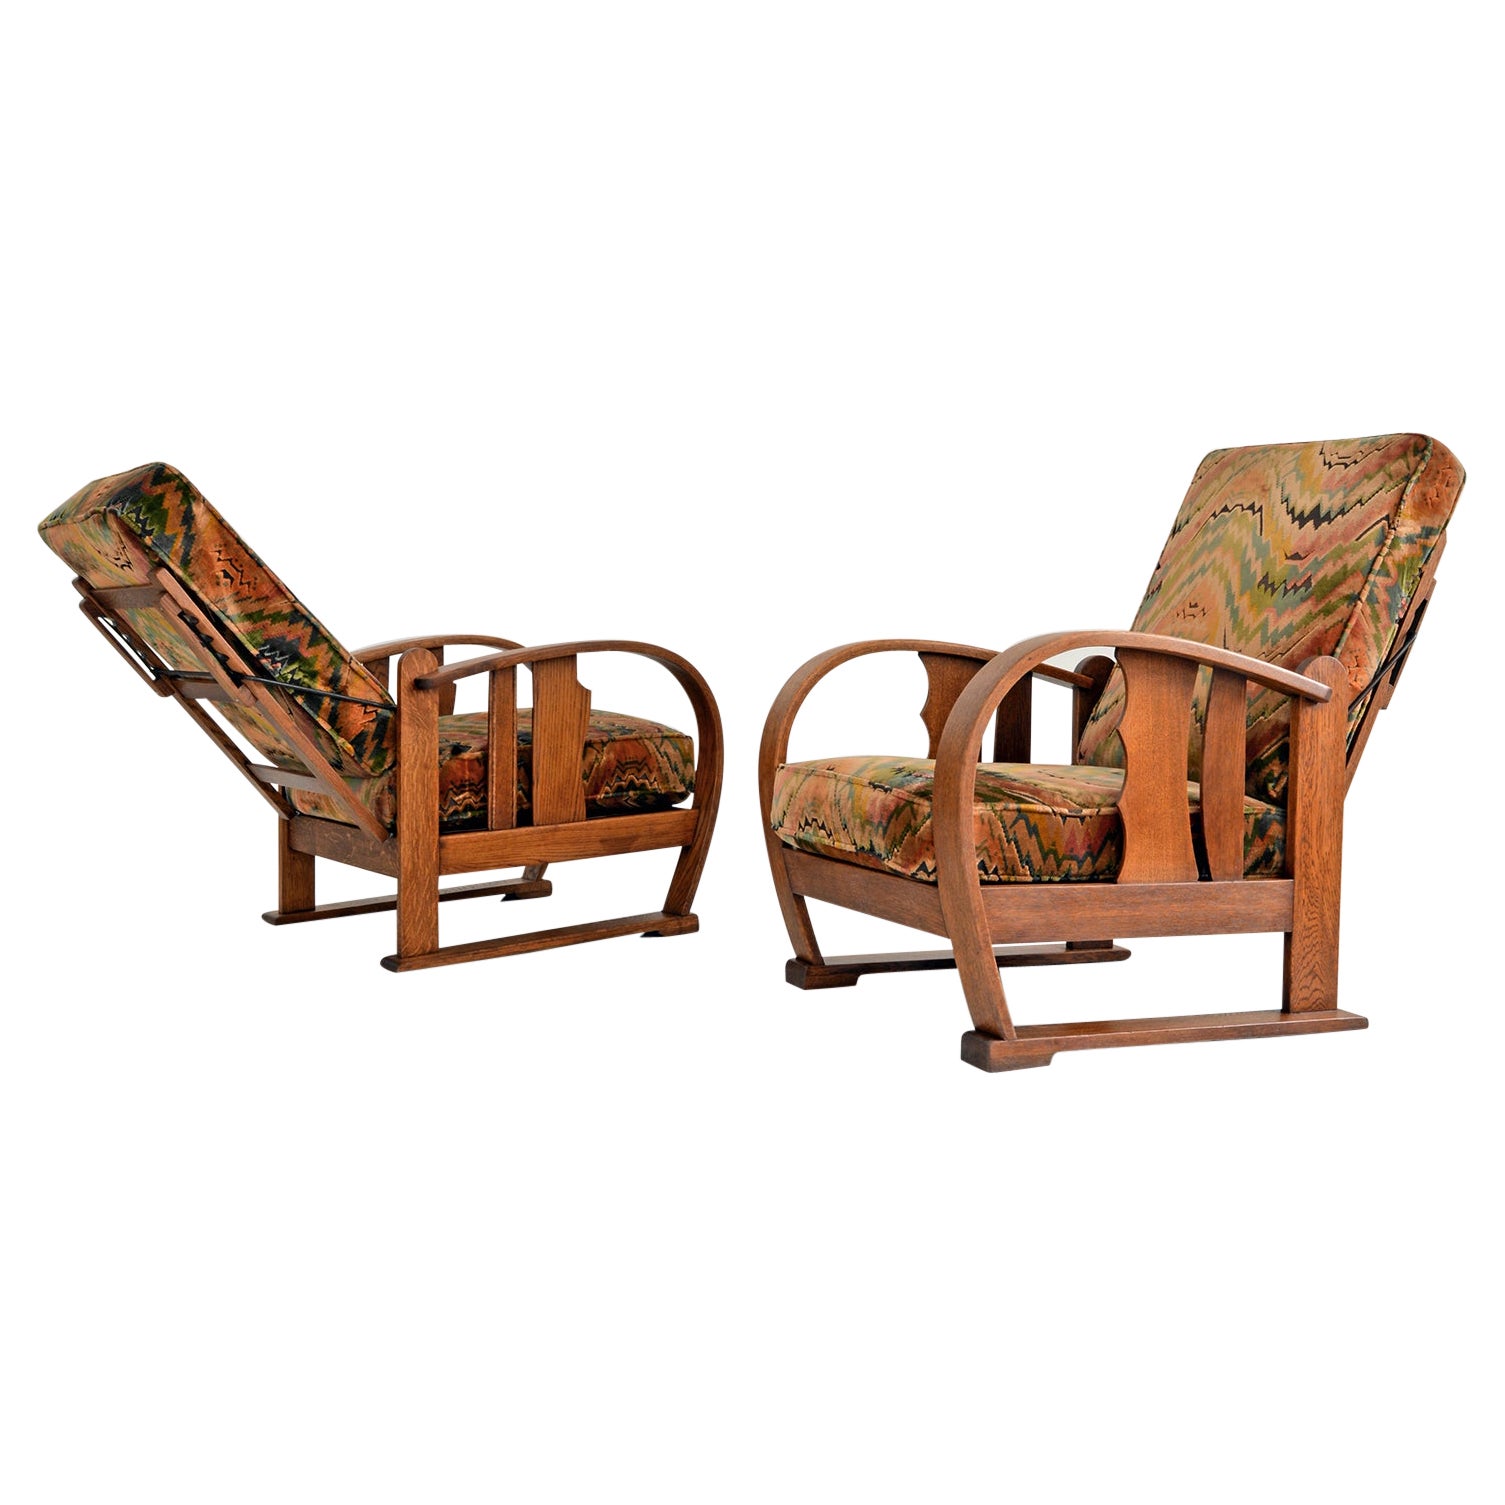 Expressionist Amsterdam School Reclining Chairs, Oak and Fabric Upholstery, 1920 For Sale